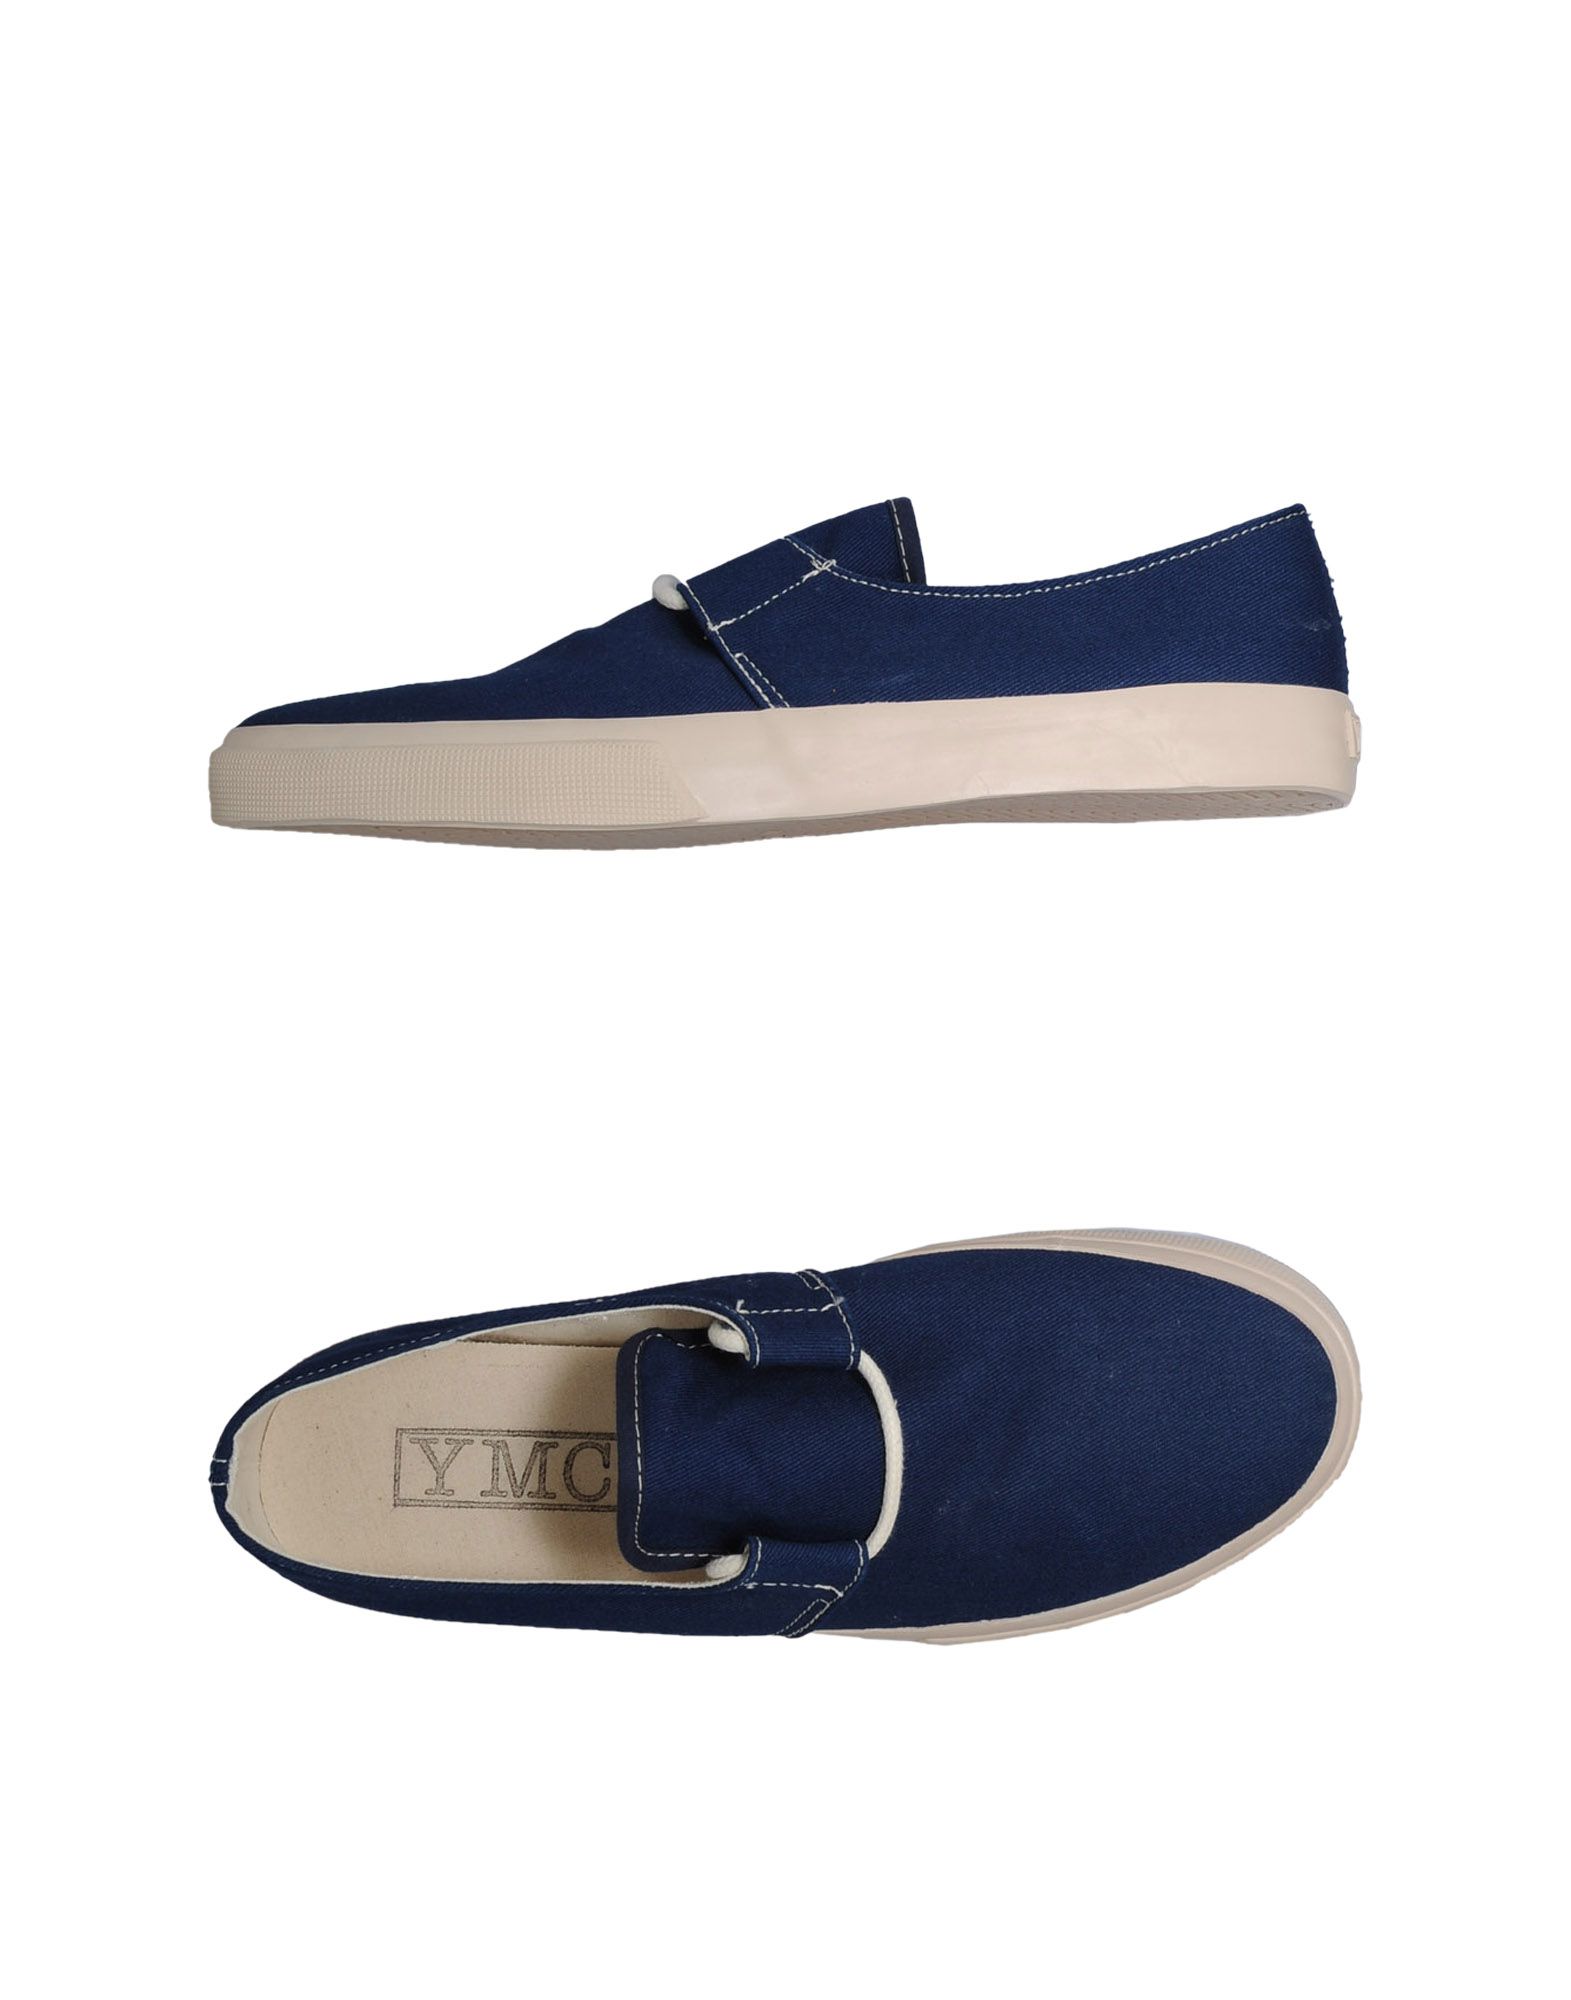 Foto Ymc You Must Create Sneakers Slip On Hombre Azul oscuro